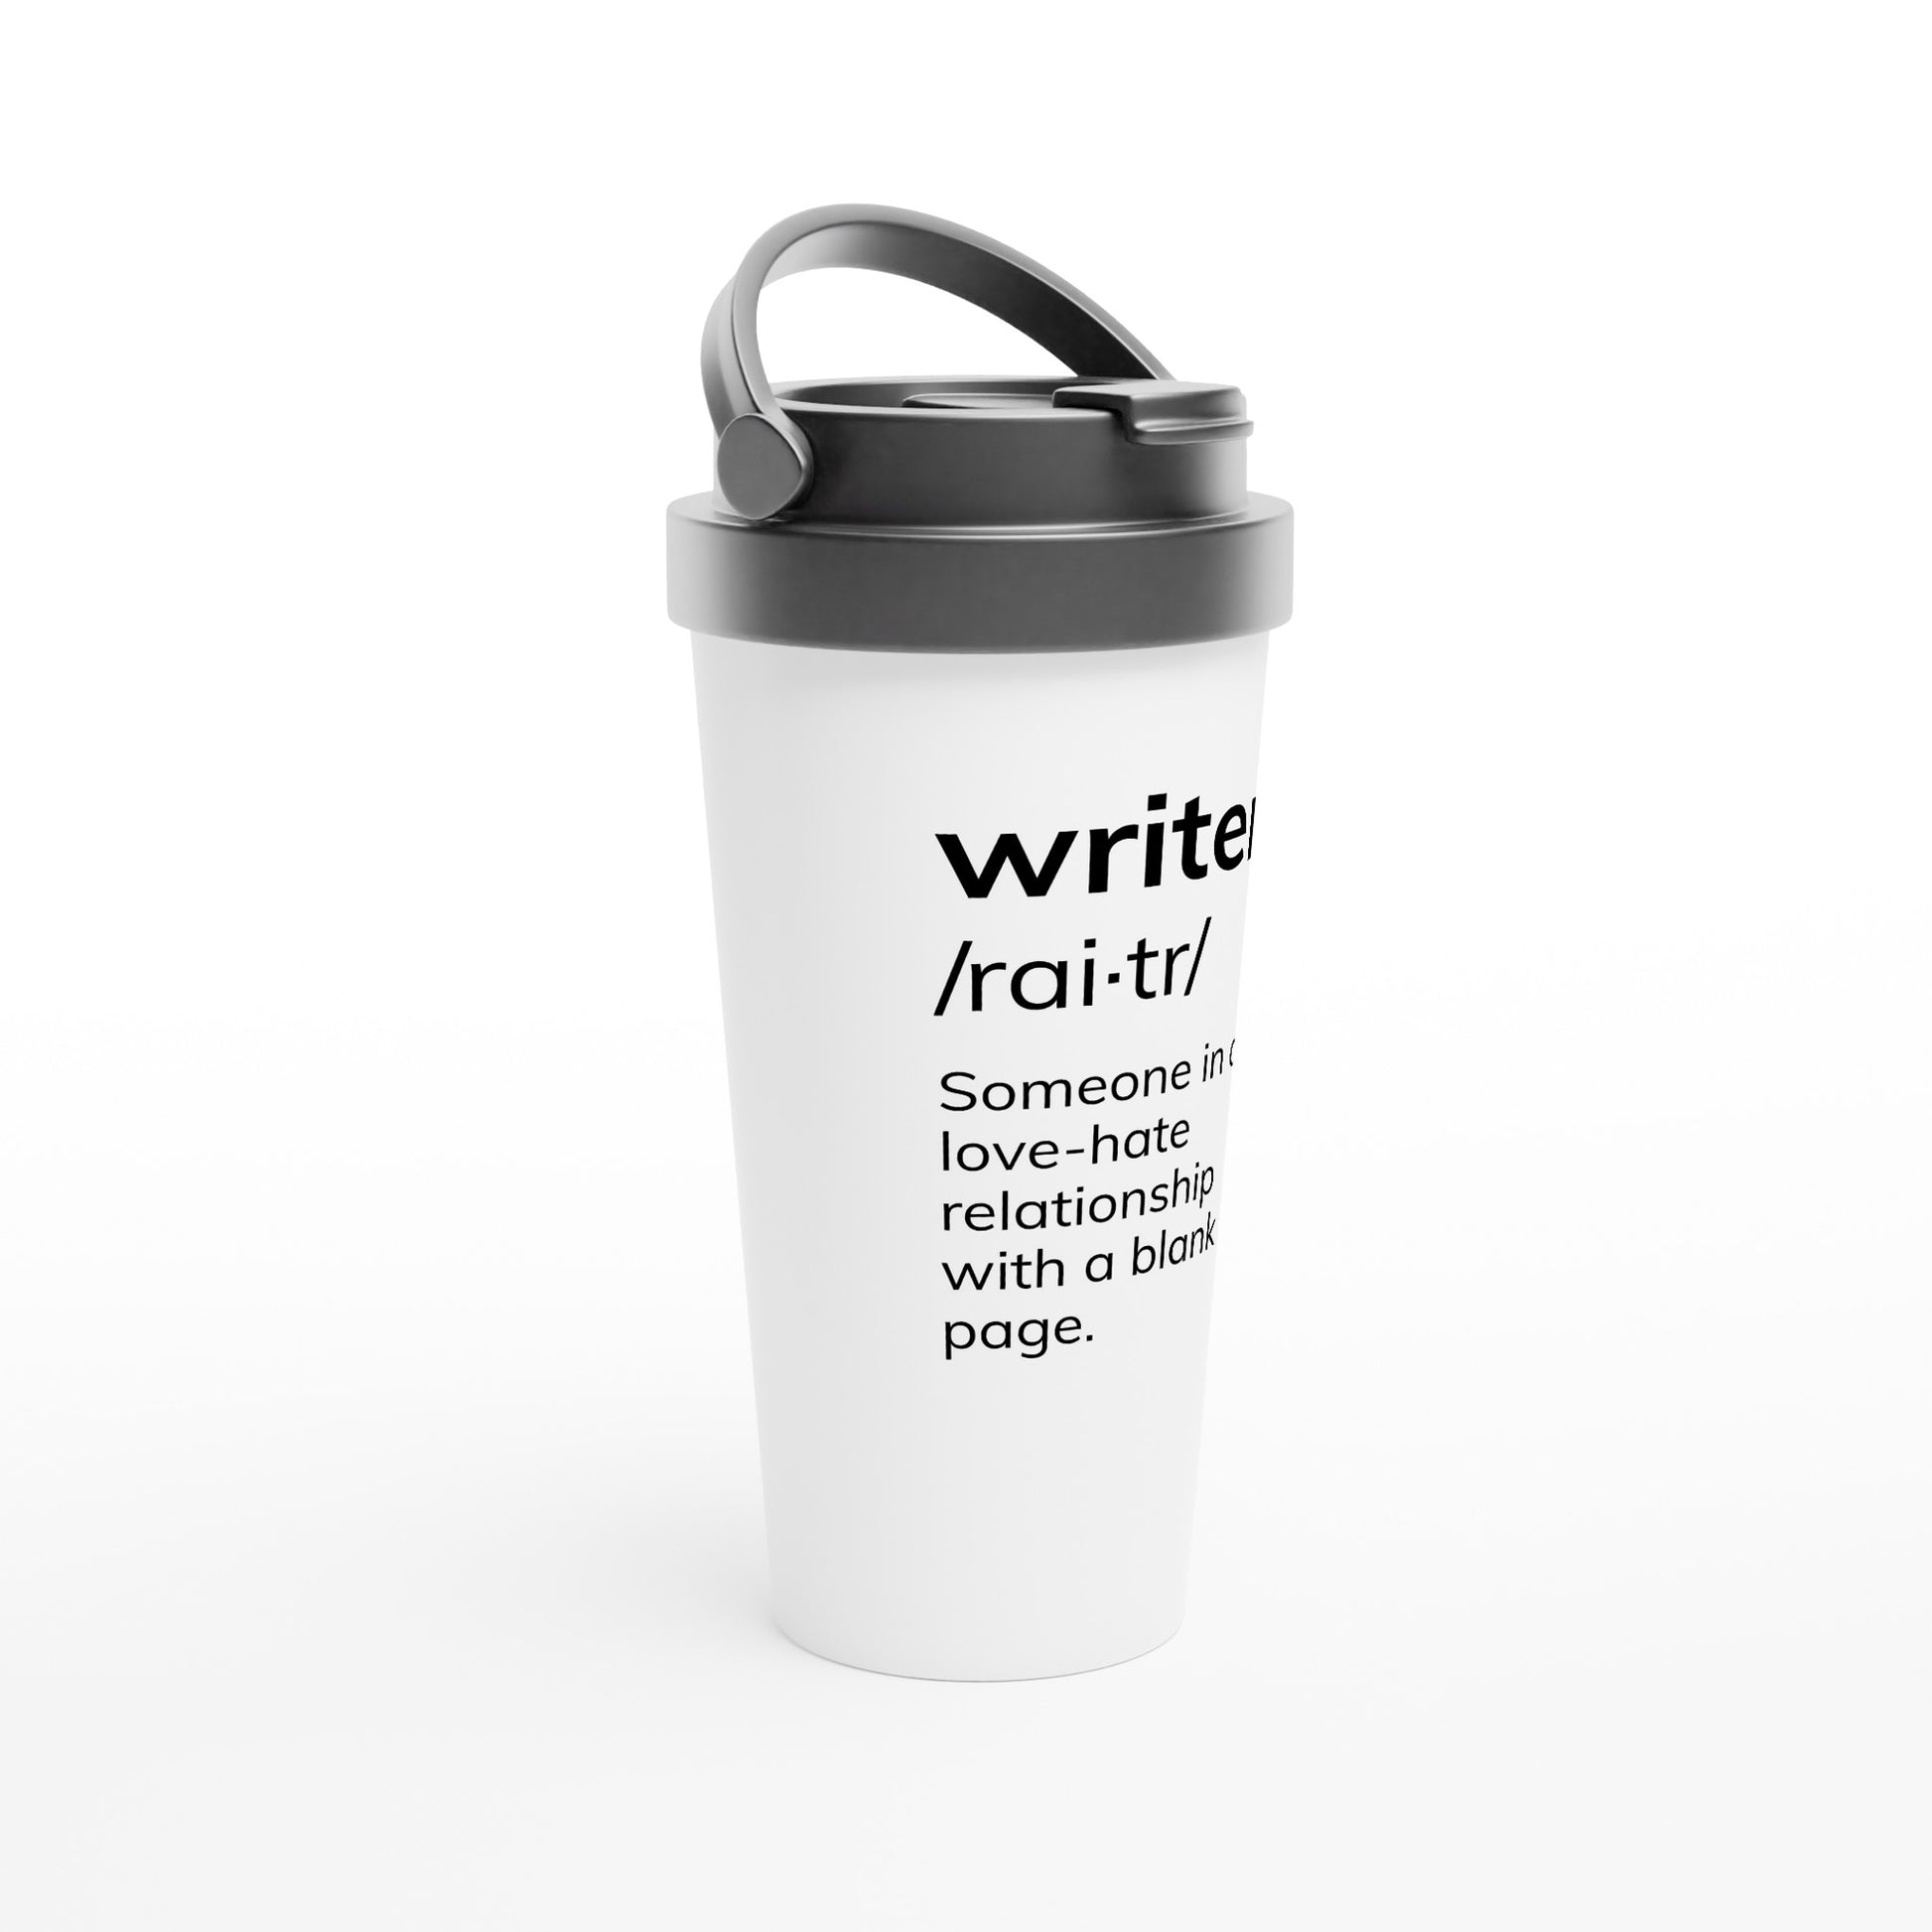 A white coffee mug with the product name "Writer: Someone in a love-hate relationship with a blank page // Writing Themed Mug" on it, perfect for any writer in their creative process.